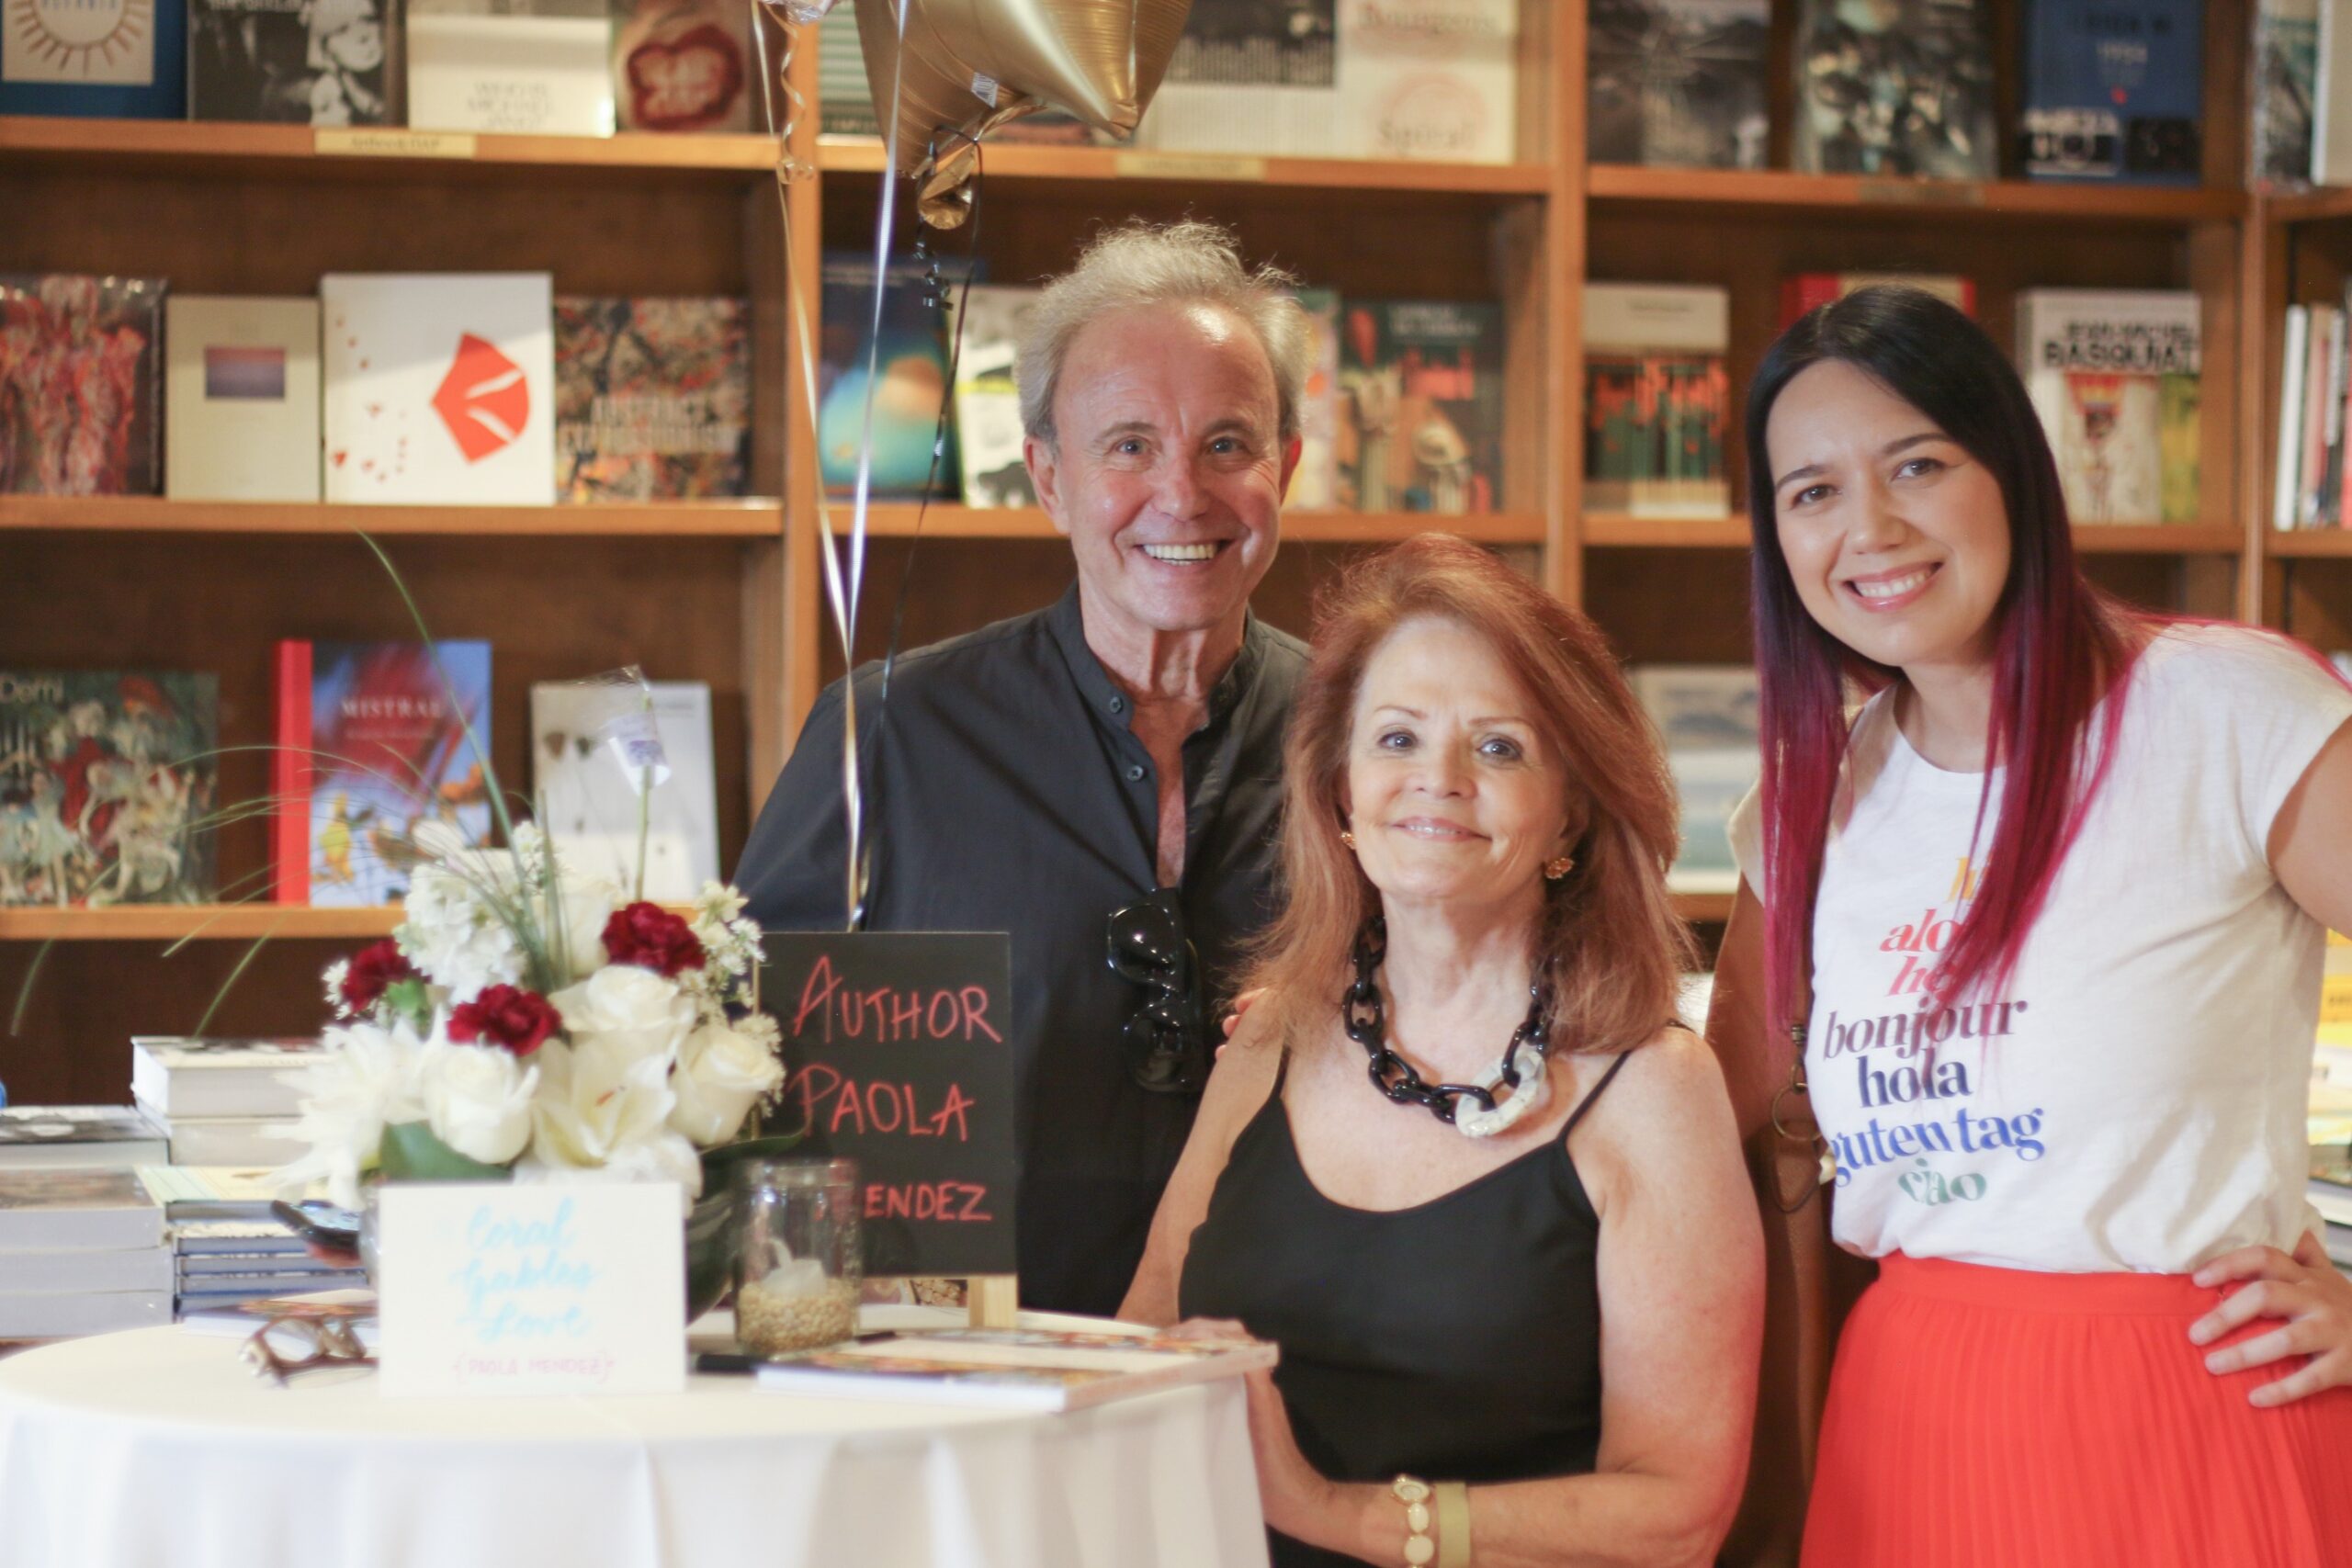 A Taste of Coral Gables Book Signing with Author Paola Mendez founder of the blog Coral Gables Love